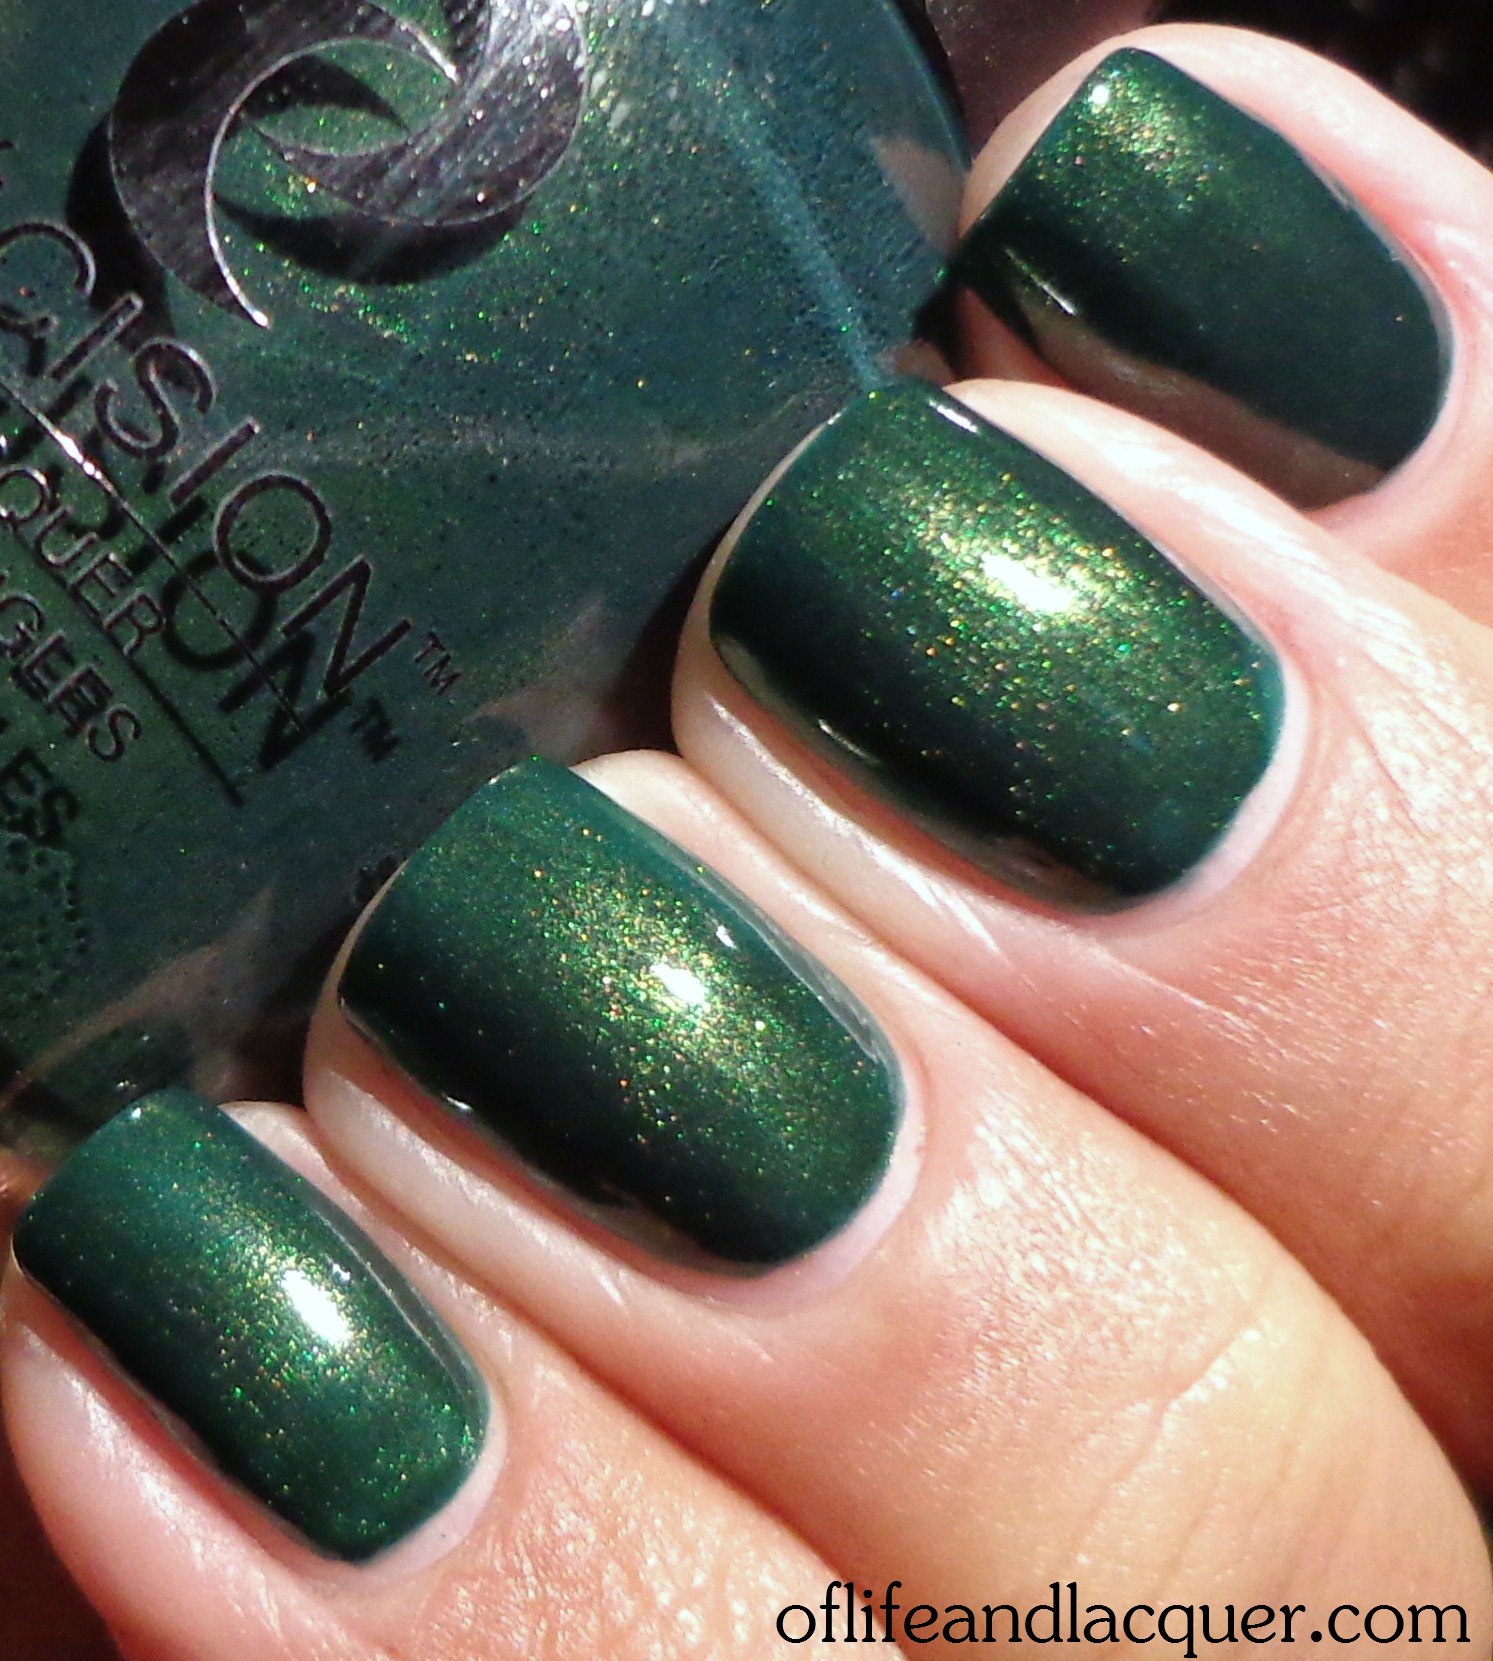 Poison Ivy Archives - Of Life and Lacquer